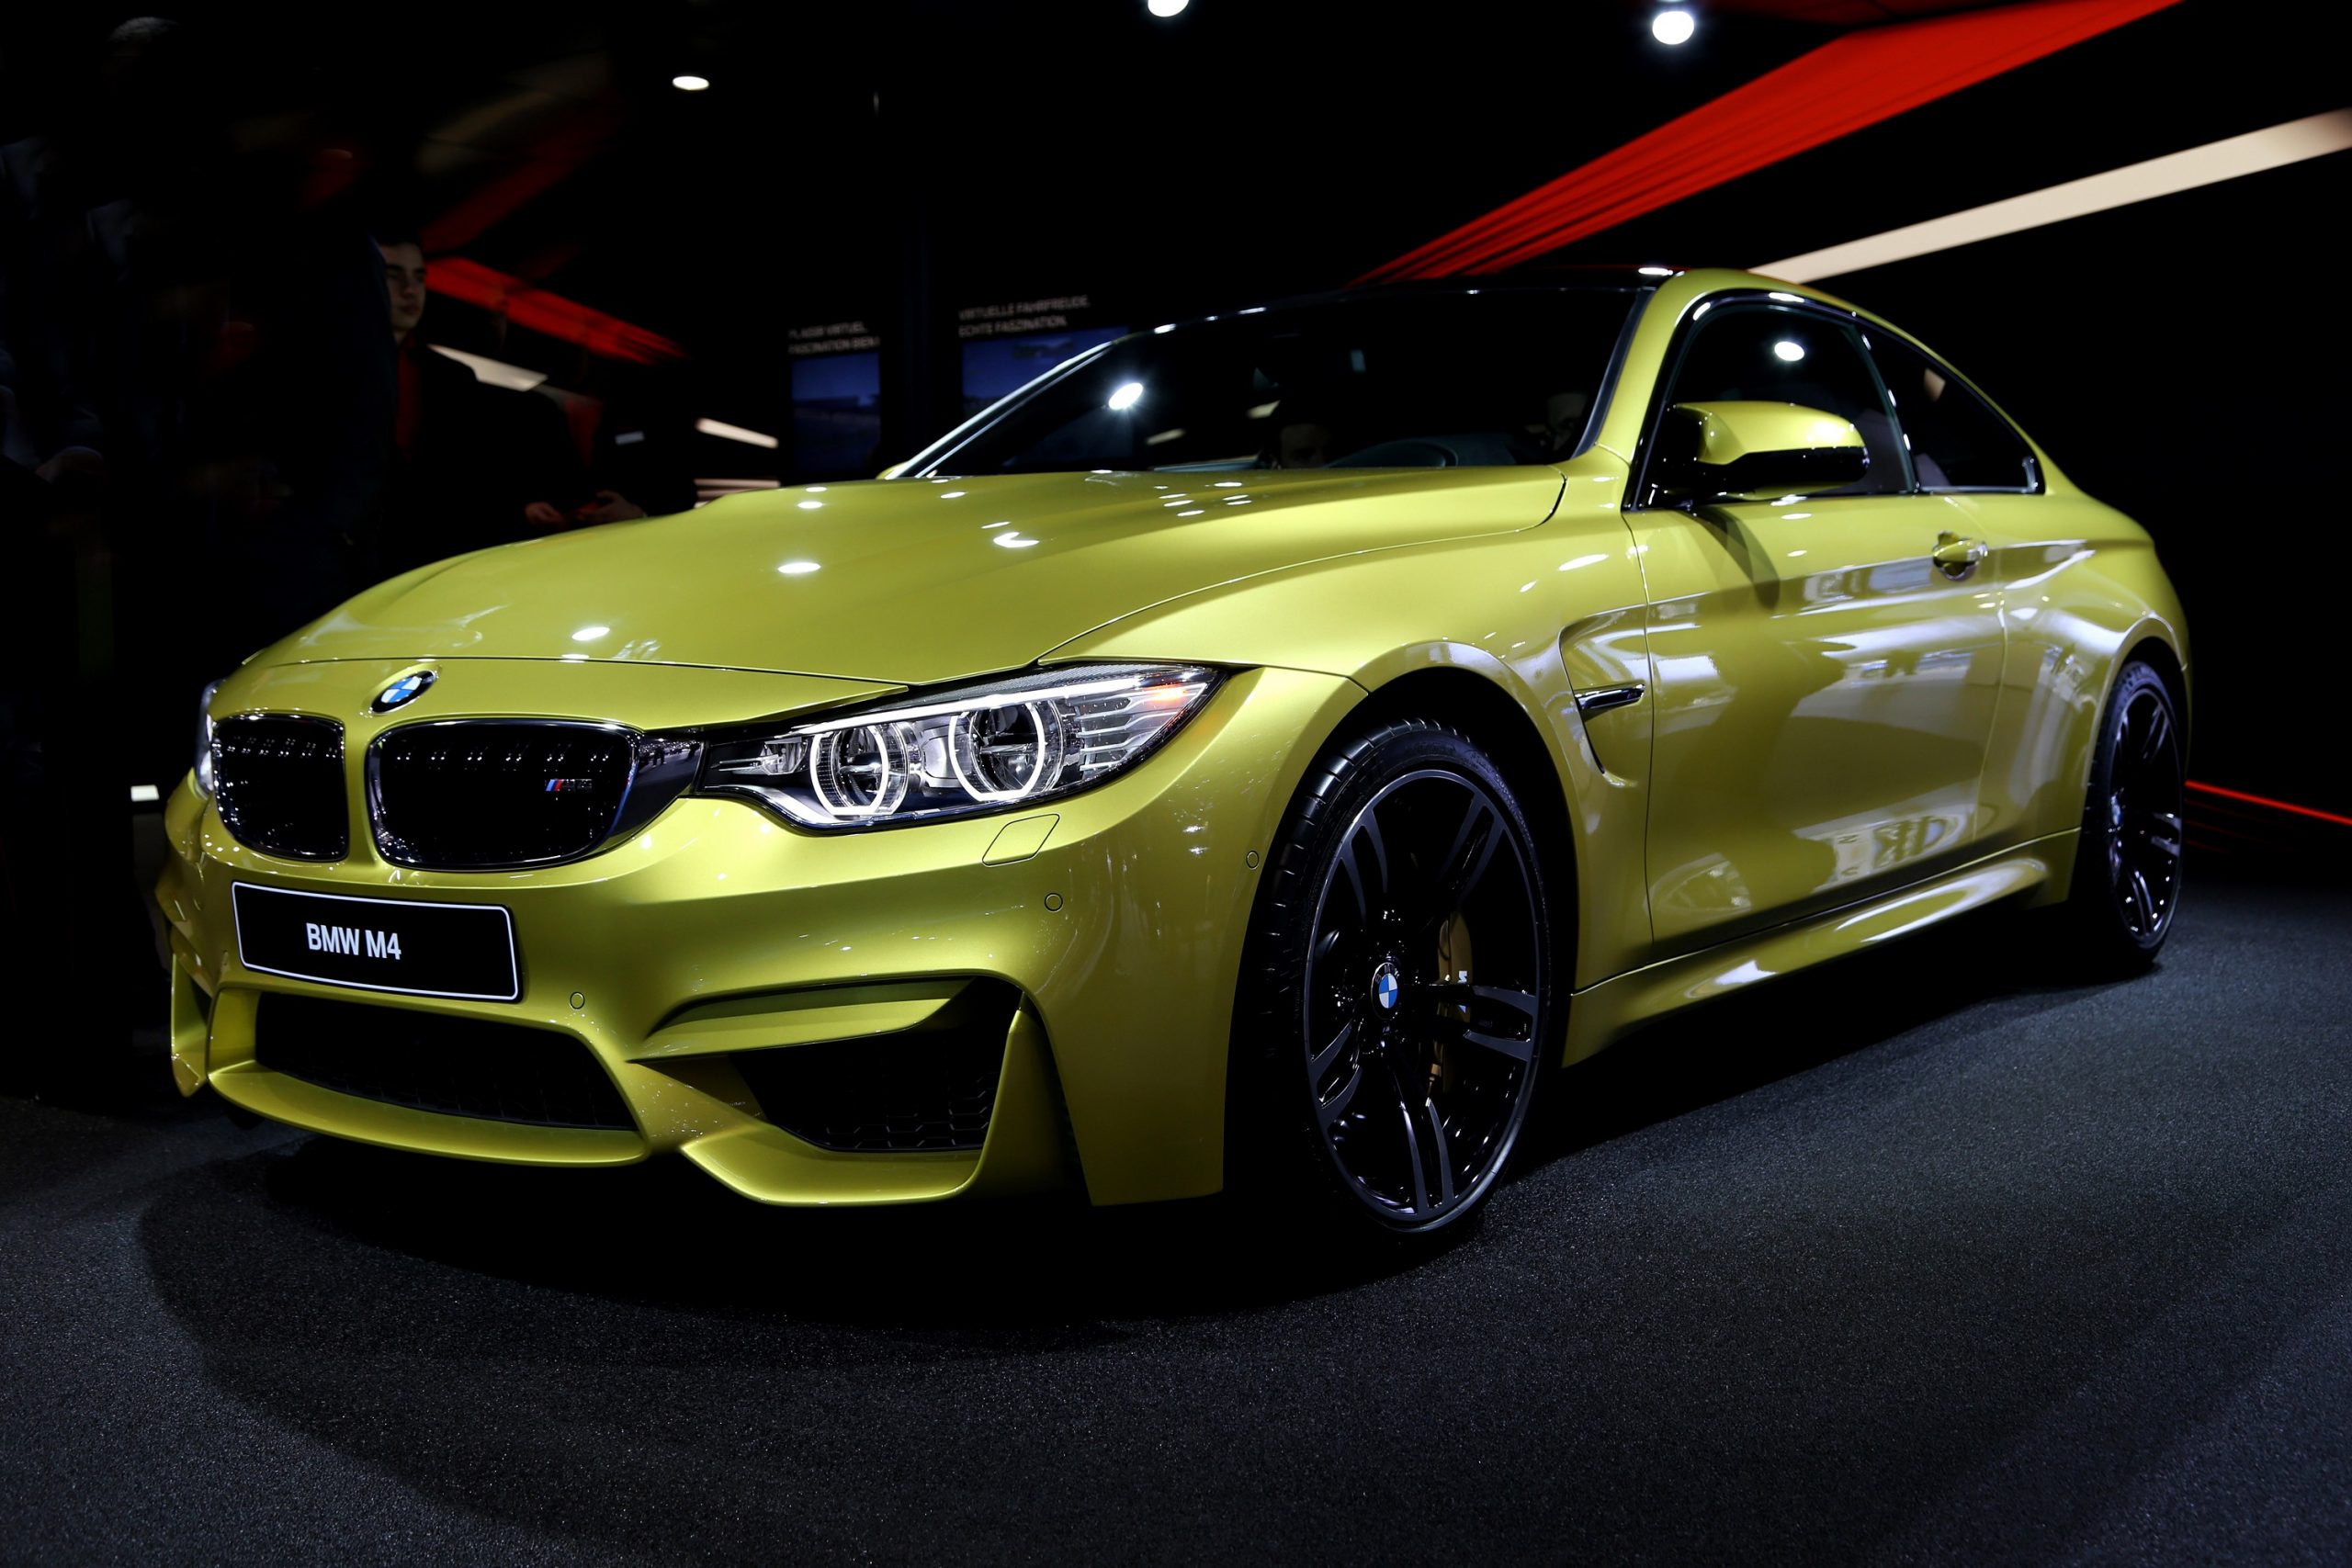 A Phoenix Yellow F80 generation M4 at an auto show